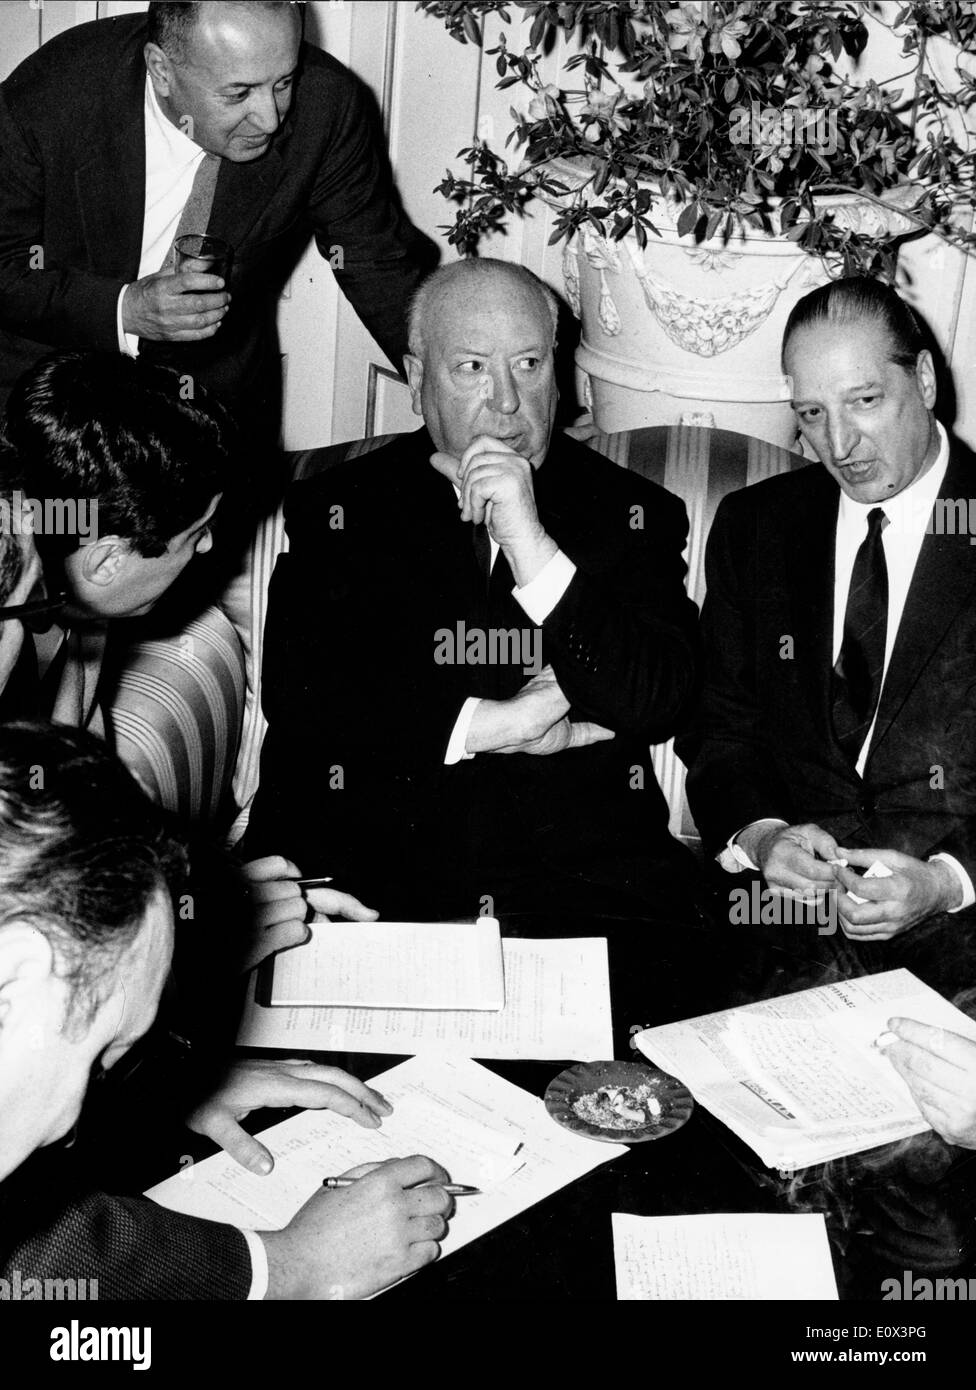 Film Producer Alfred Hitchcock at a press conference in Rome Stock Photo